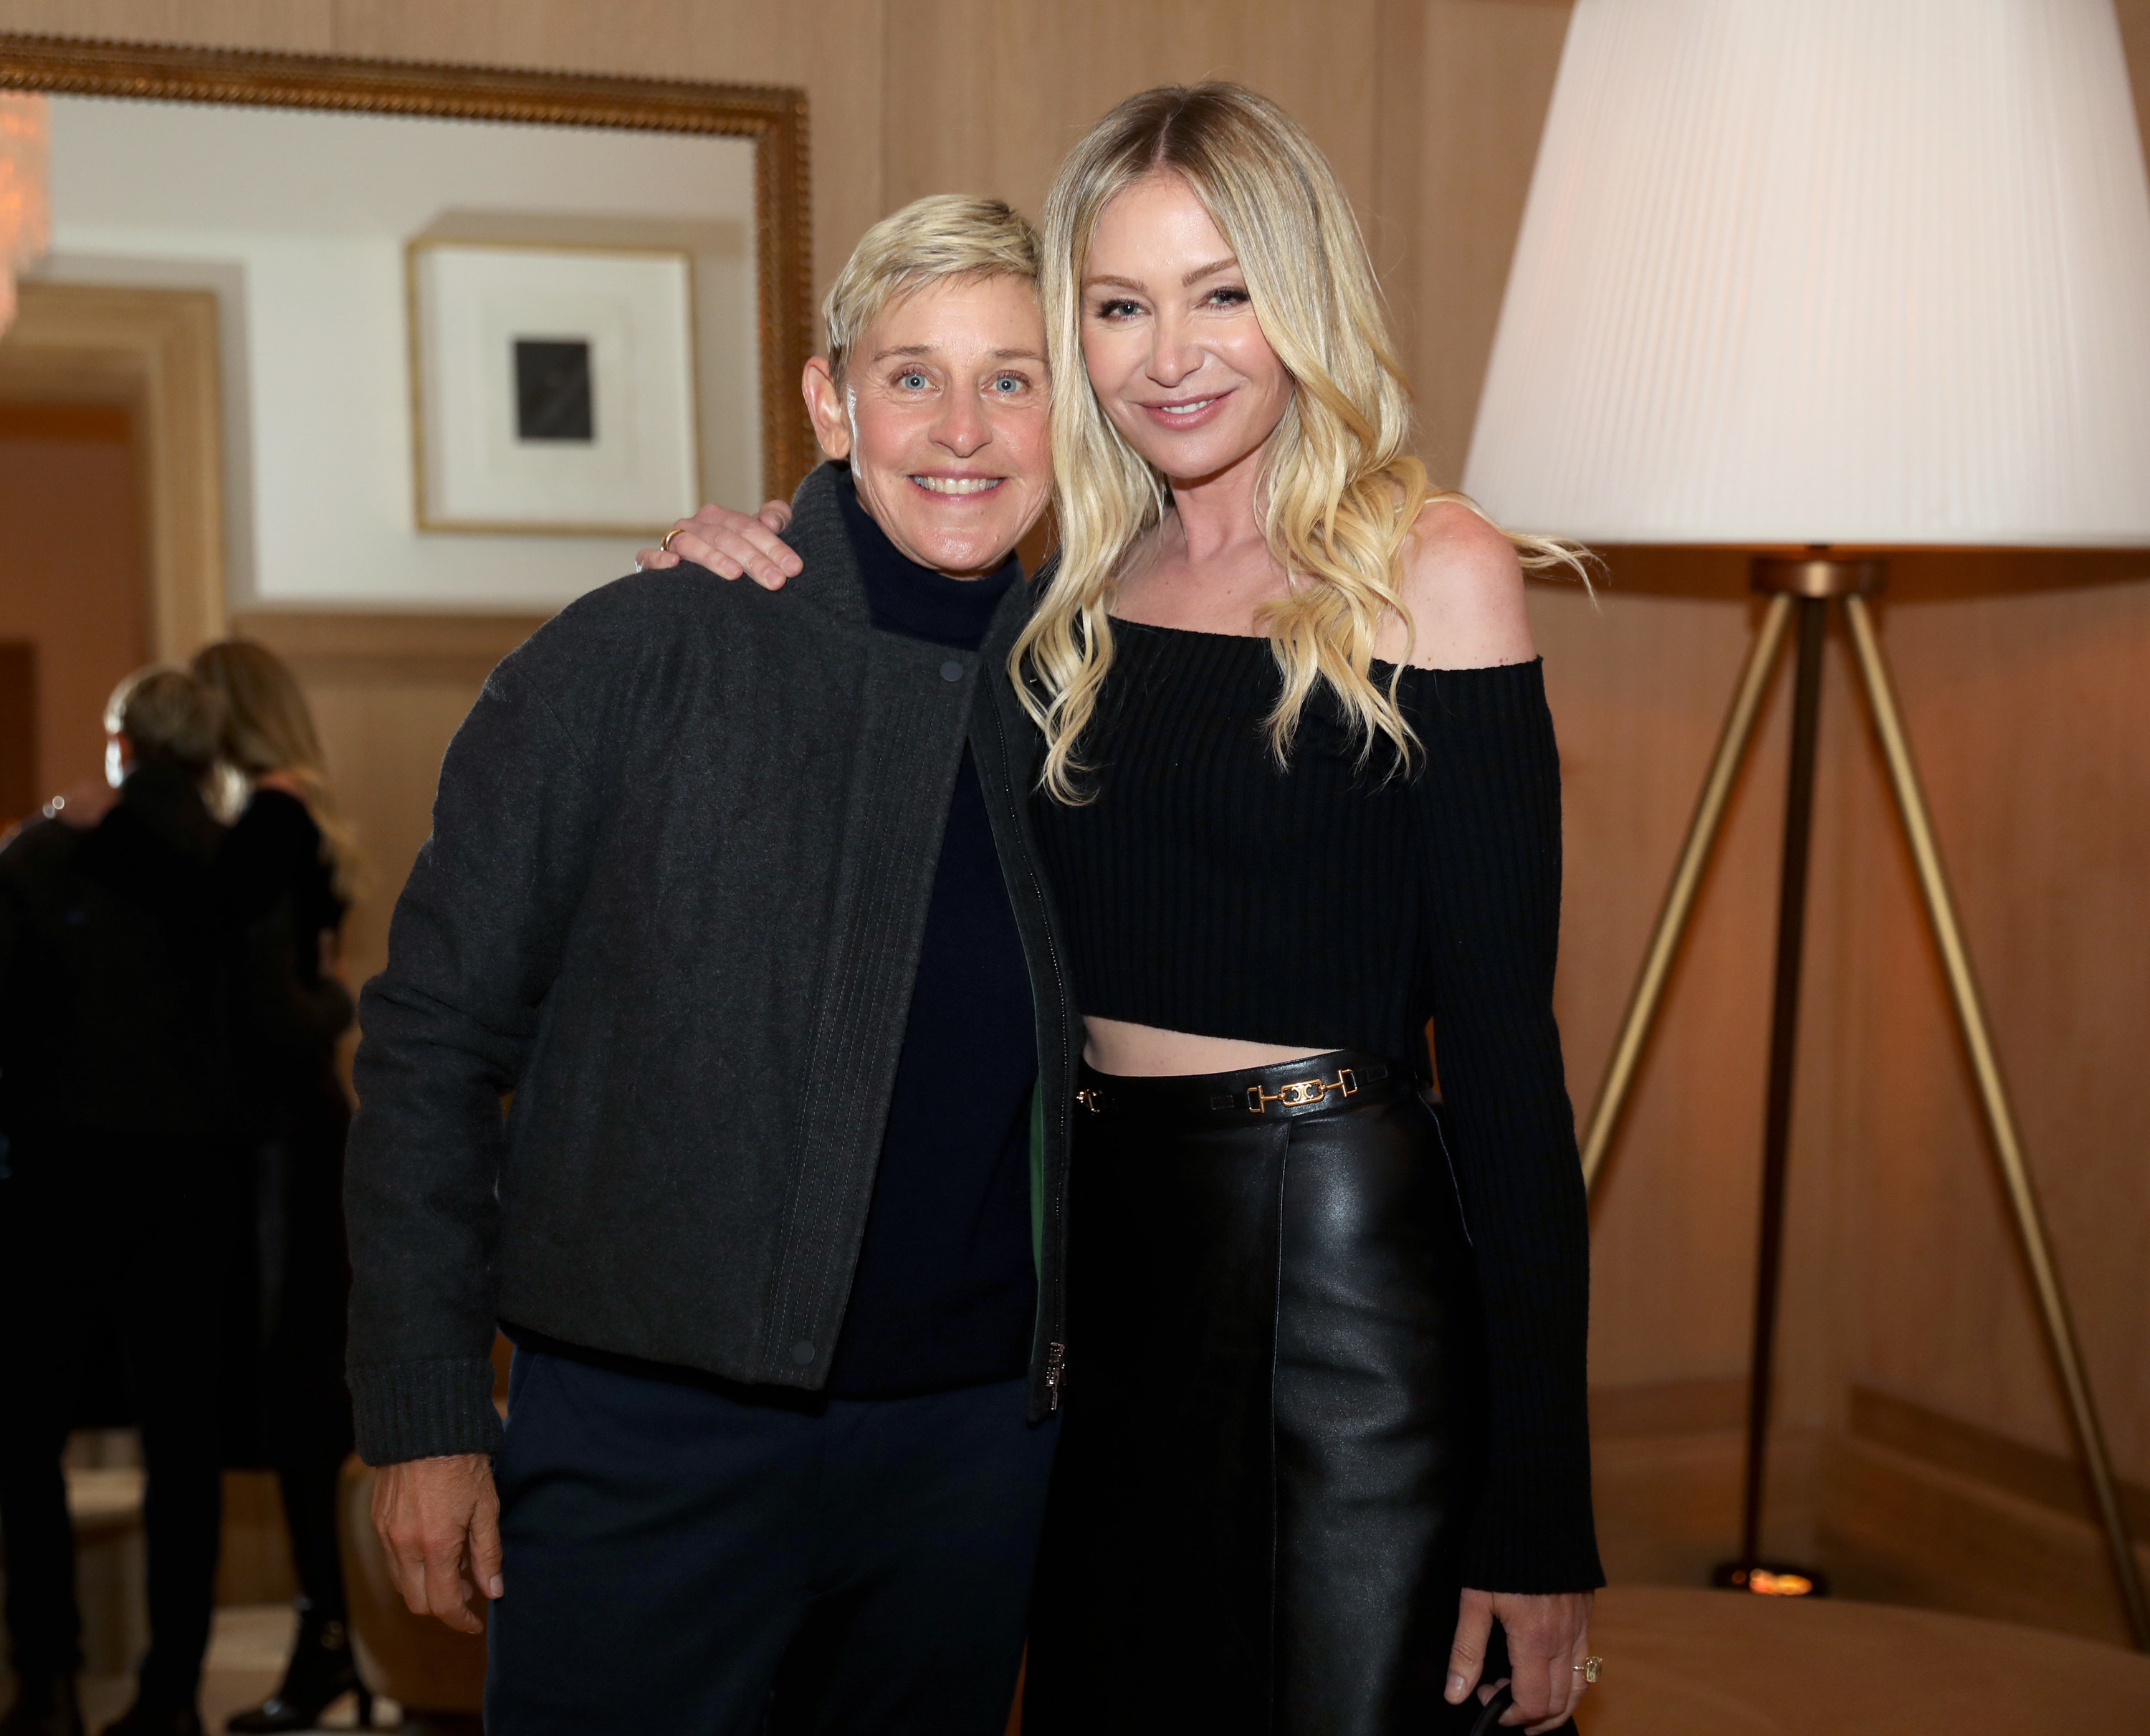 Ellen DeGeneres and Portia de Rossi are seen as RH Celebrates The Unveiling of RH San Francisco, The Gallery at the Historic Bethlehem Steel Building on March 17, 2022 in San Francisco, California